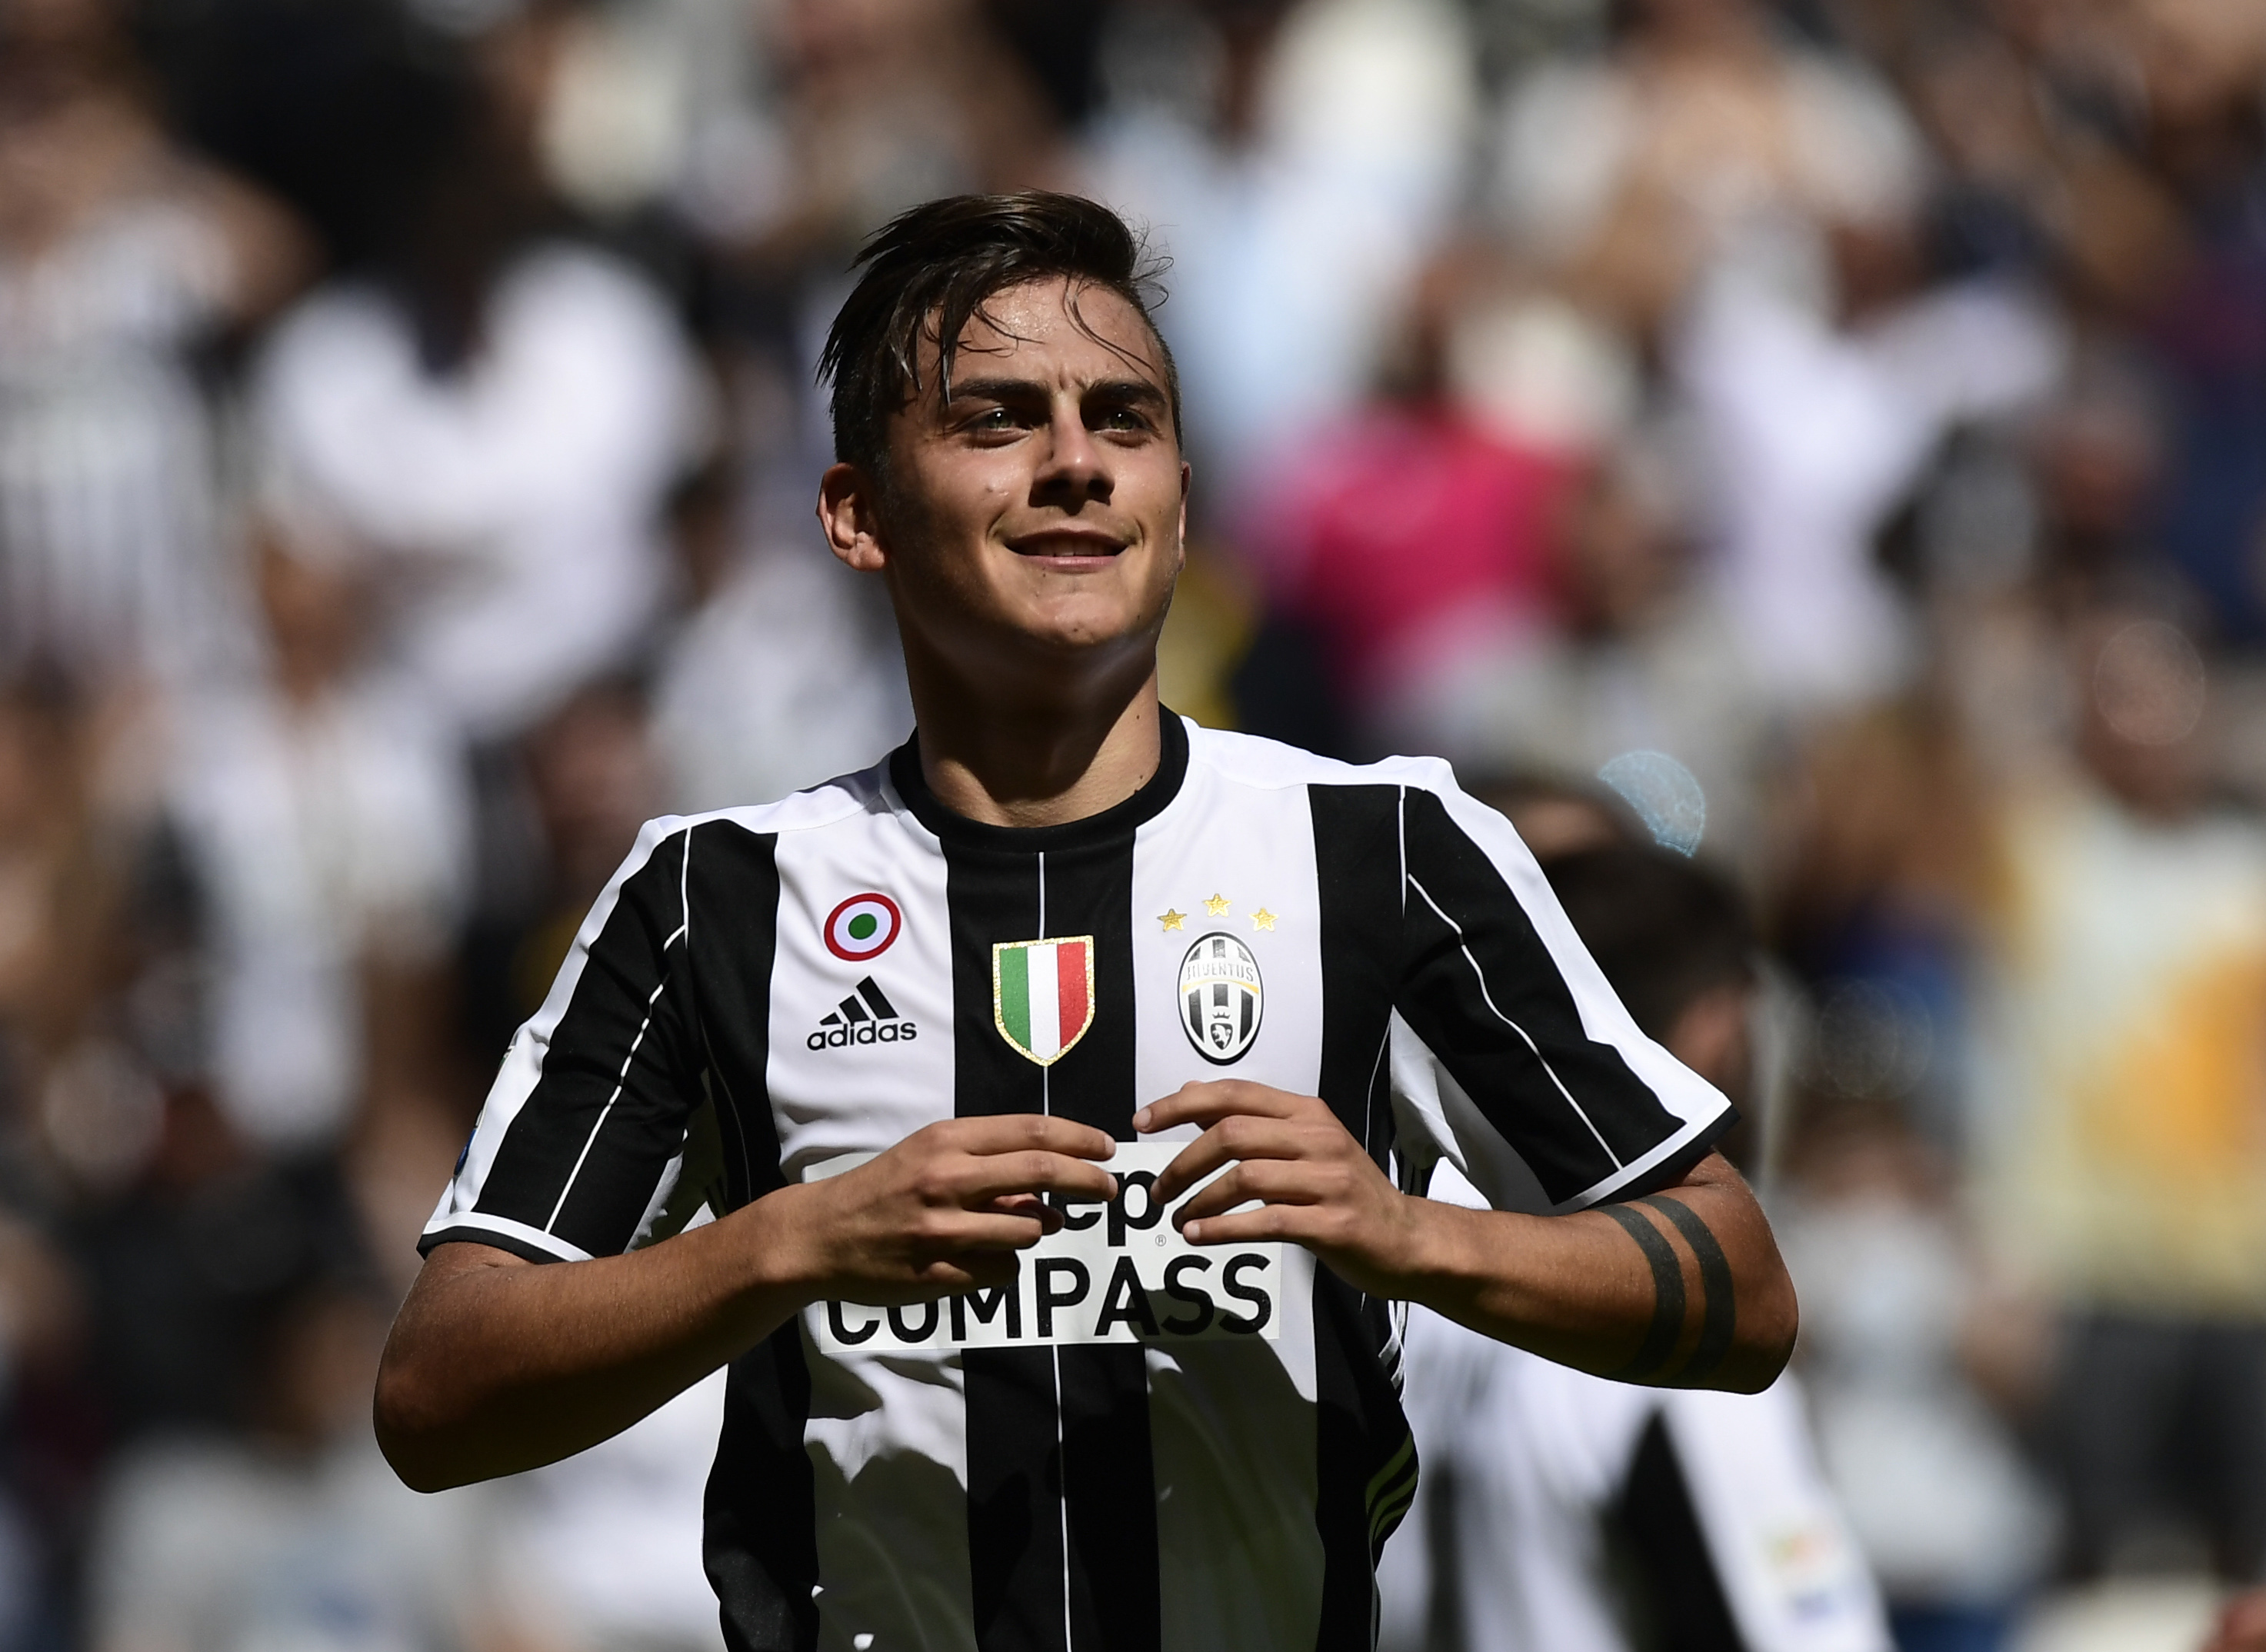 Juventus' Argentinian forward Paulo Dybala celebrates after scoring during the Italian Serie A football match Juventus vs Crotone at the Juventus Stadium in Turin on May 21, 2017.  / AFP PHOTO / MIGUEL MEDINA        (Photo credit should read MIGUEL MEDINA/AFP/Getty Images)